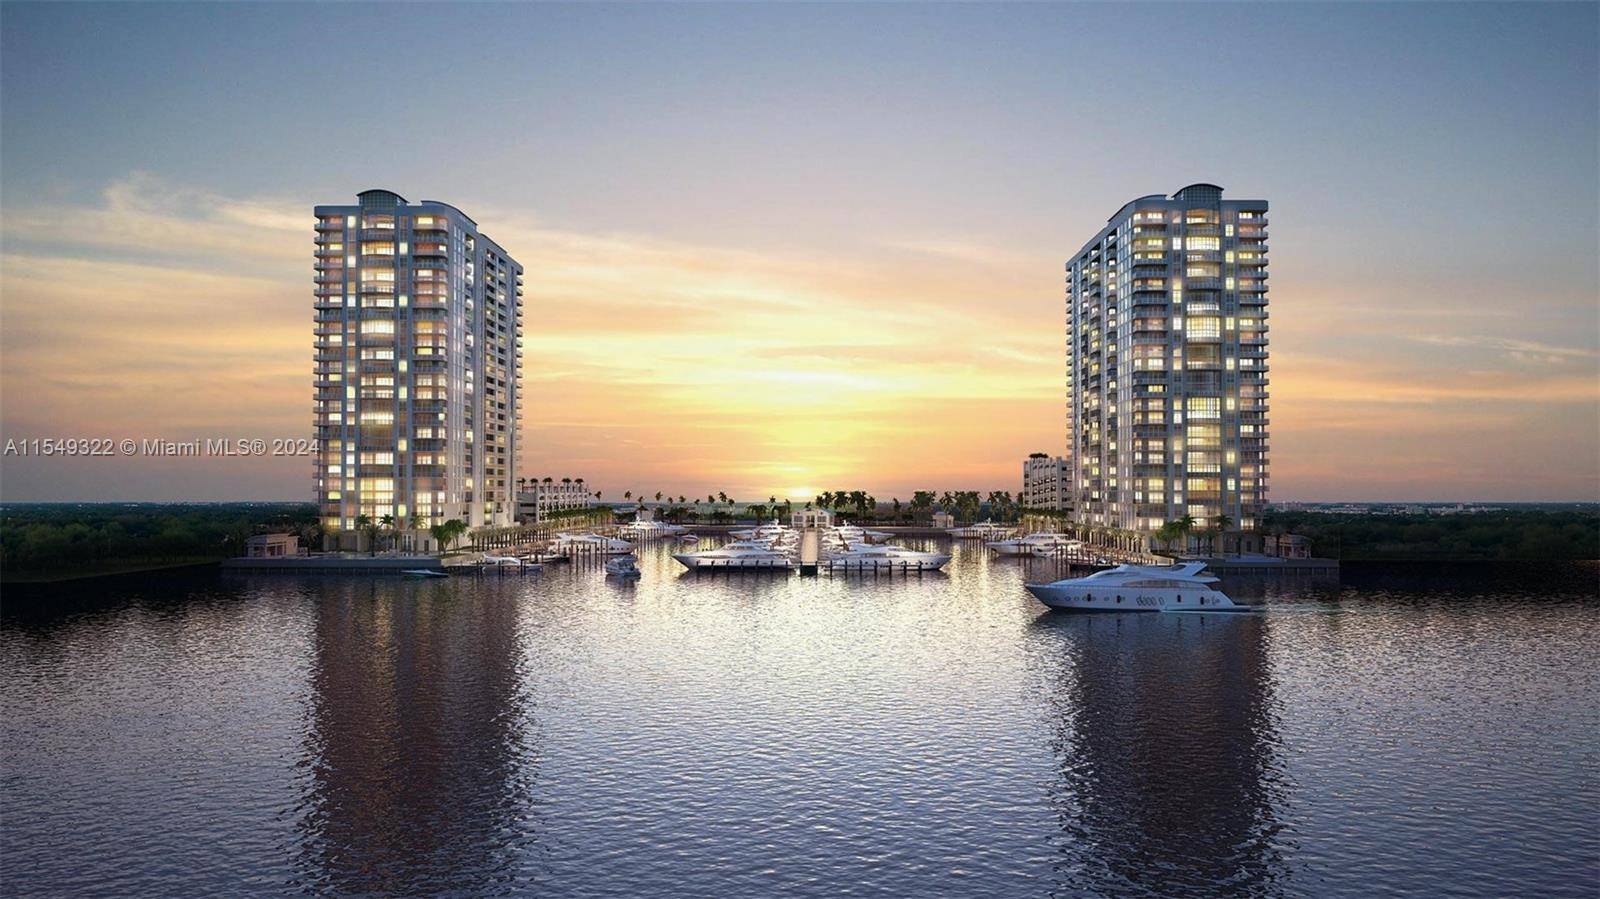 Large 2 Bedroom 2. 5 bath glass enclosed DEN residence at the remarkable MARINA PALMS RESIDENCE AND MARINA in N Miami.